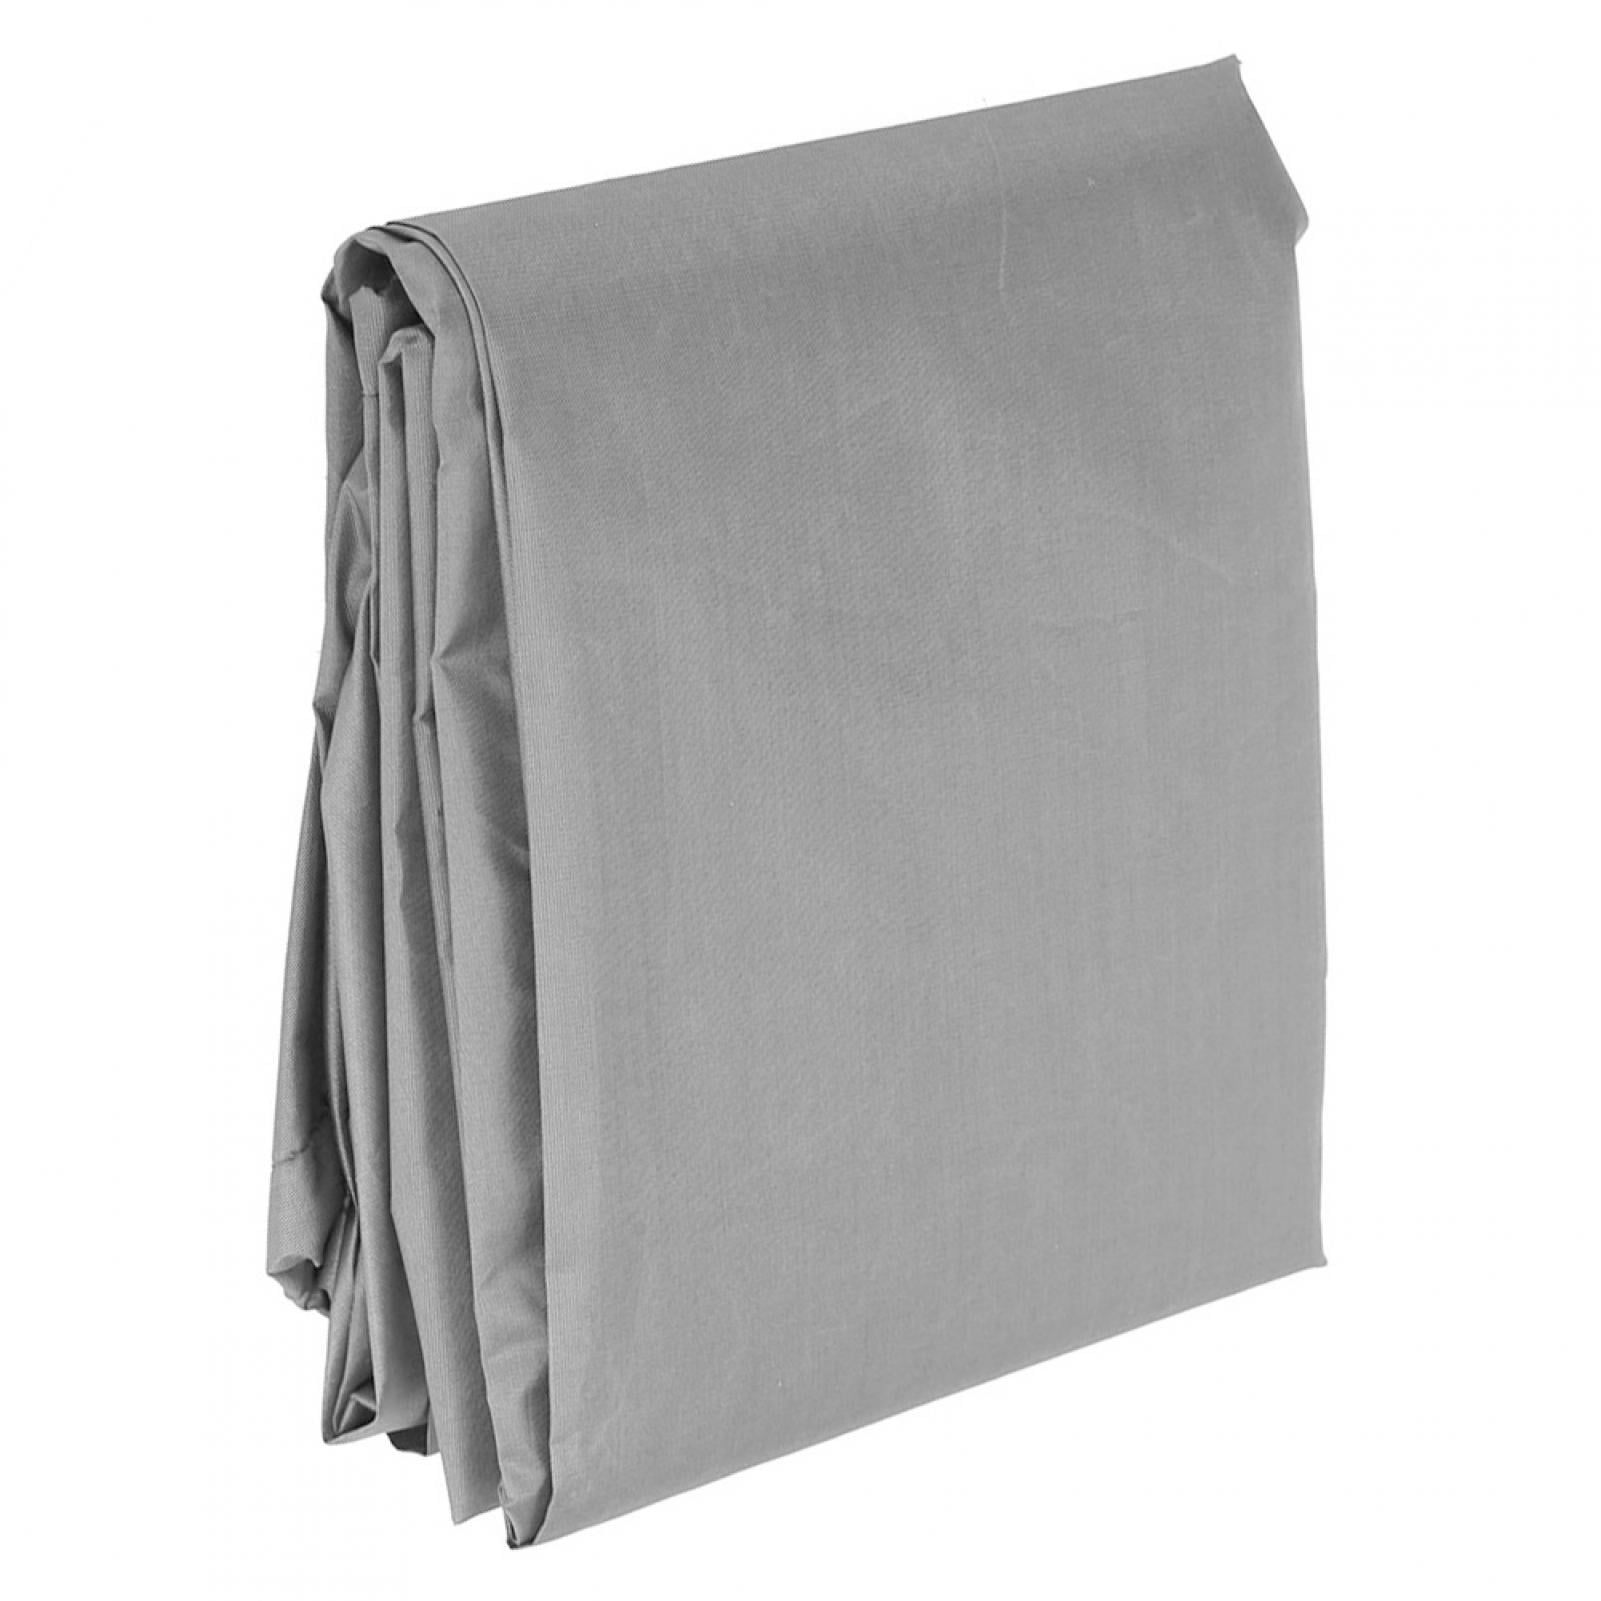 ACOUTO Gray Waterproof Table Cover Dustproof Patio Chair Covers 